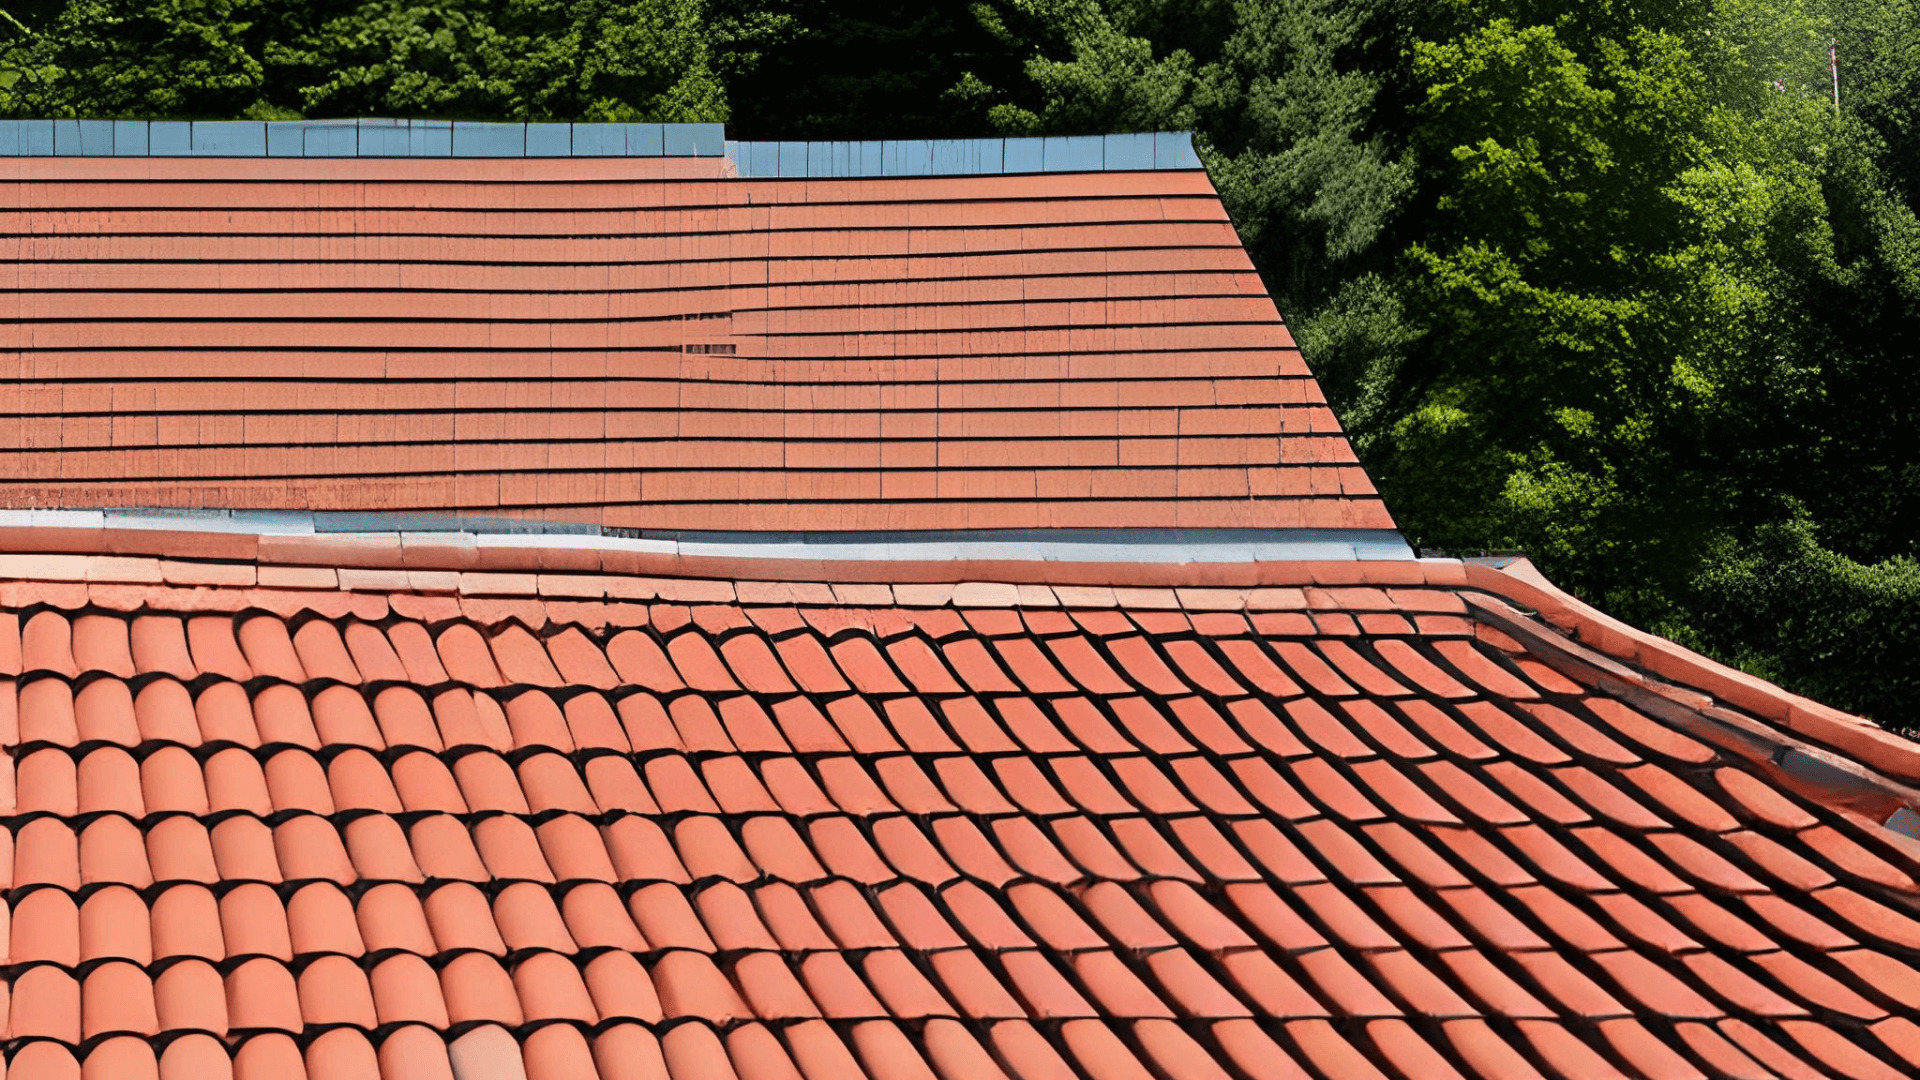 Top view - Clay Shingles - Roofing